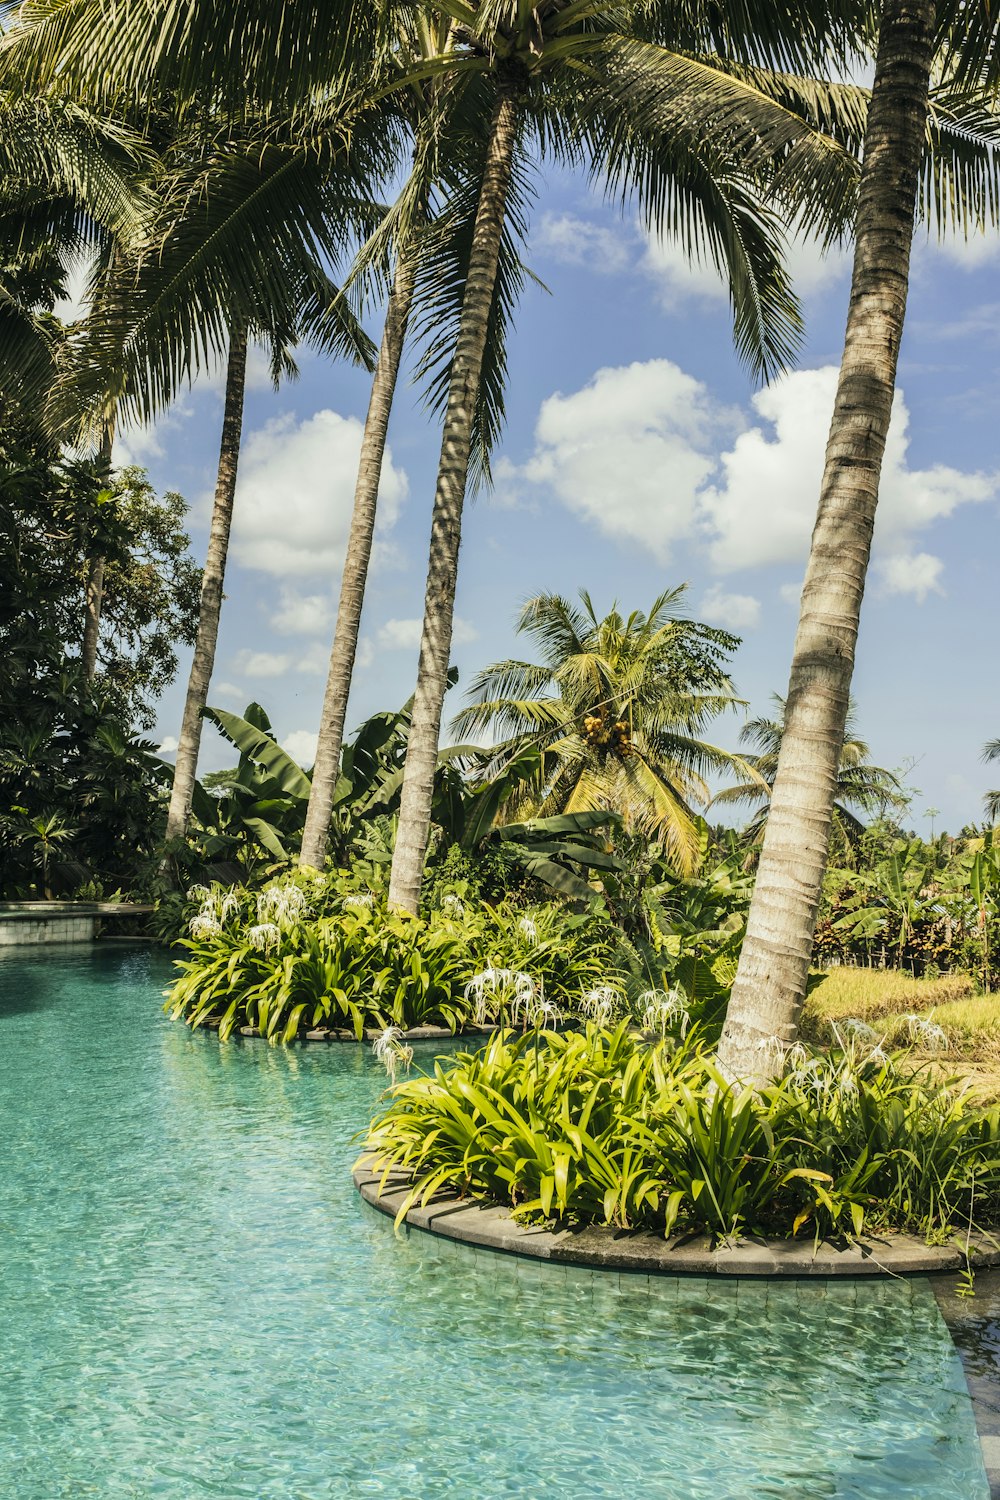 a pool surrounded by palm trees in a tropical setting